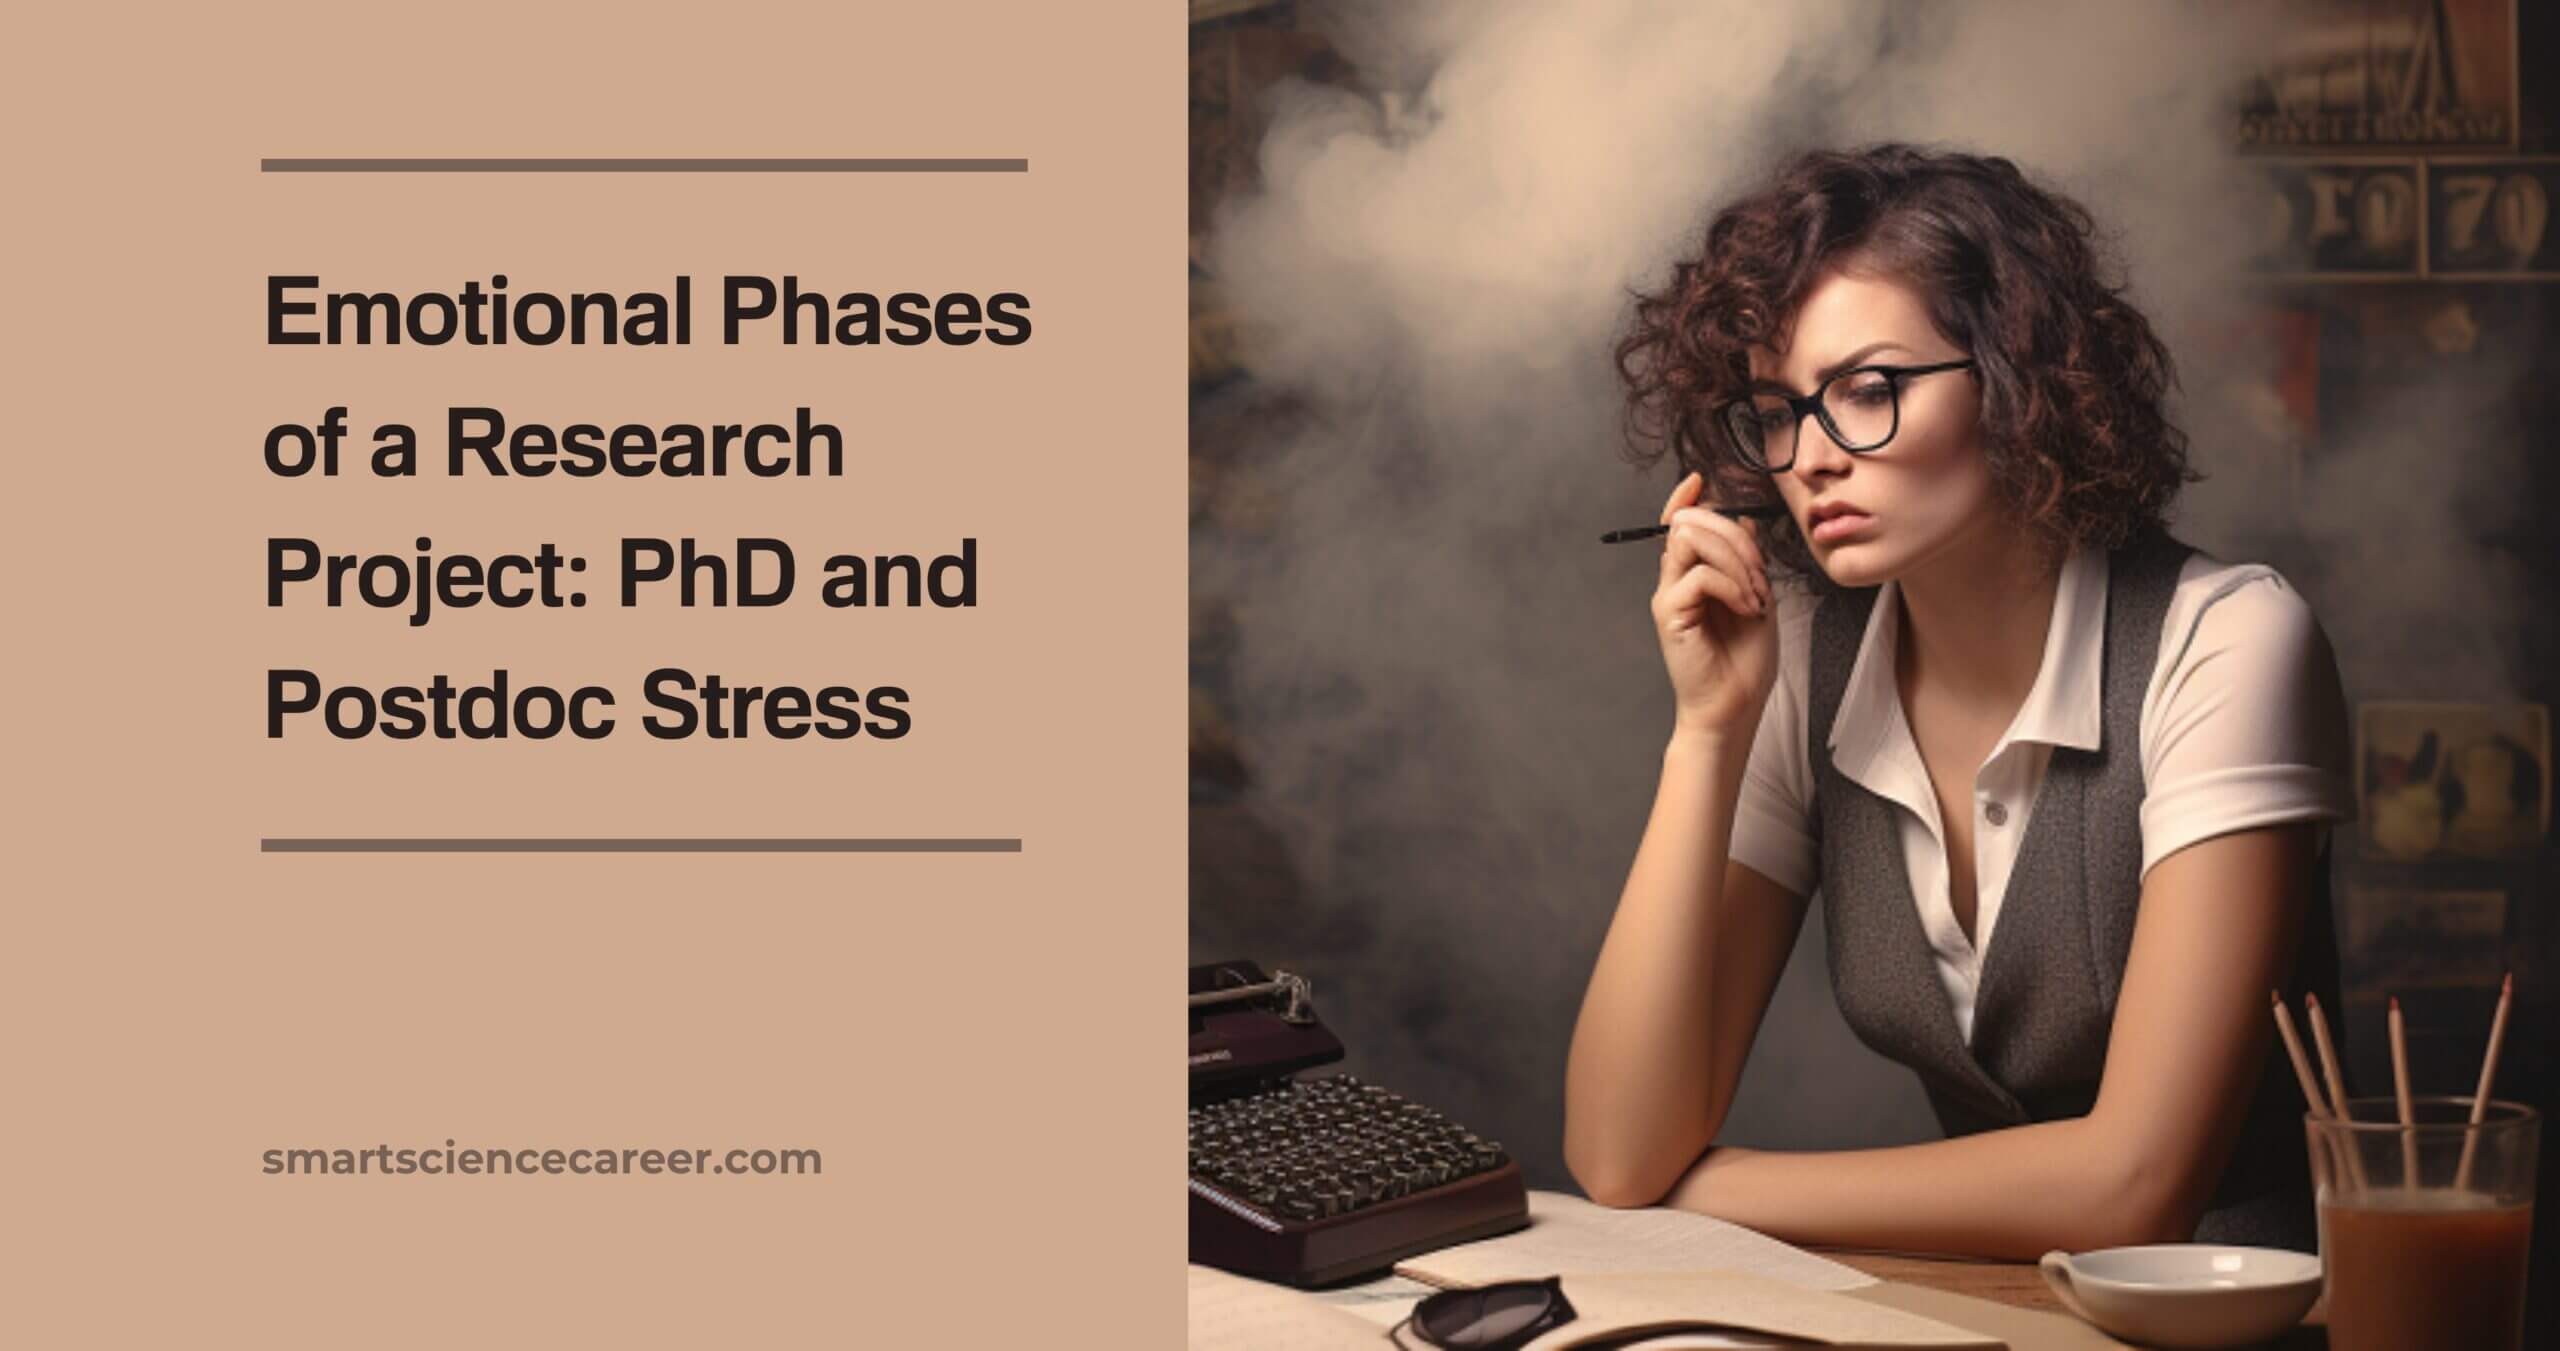 Emotional phases of a research project - PhD and Postdoc stress title